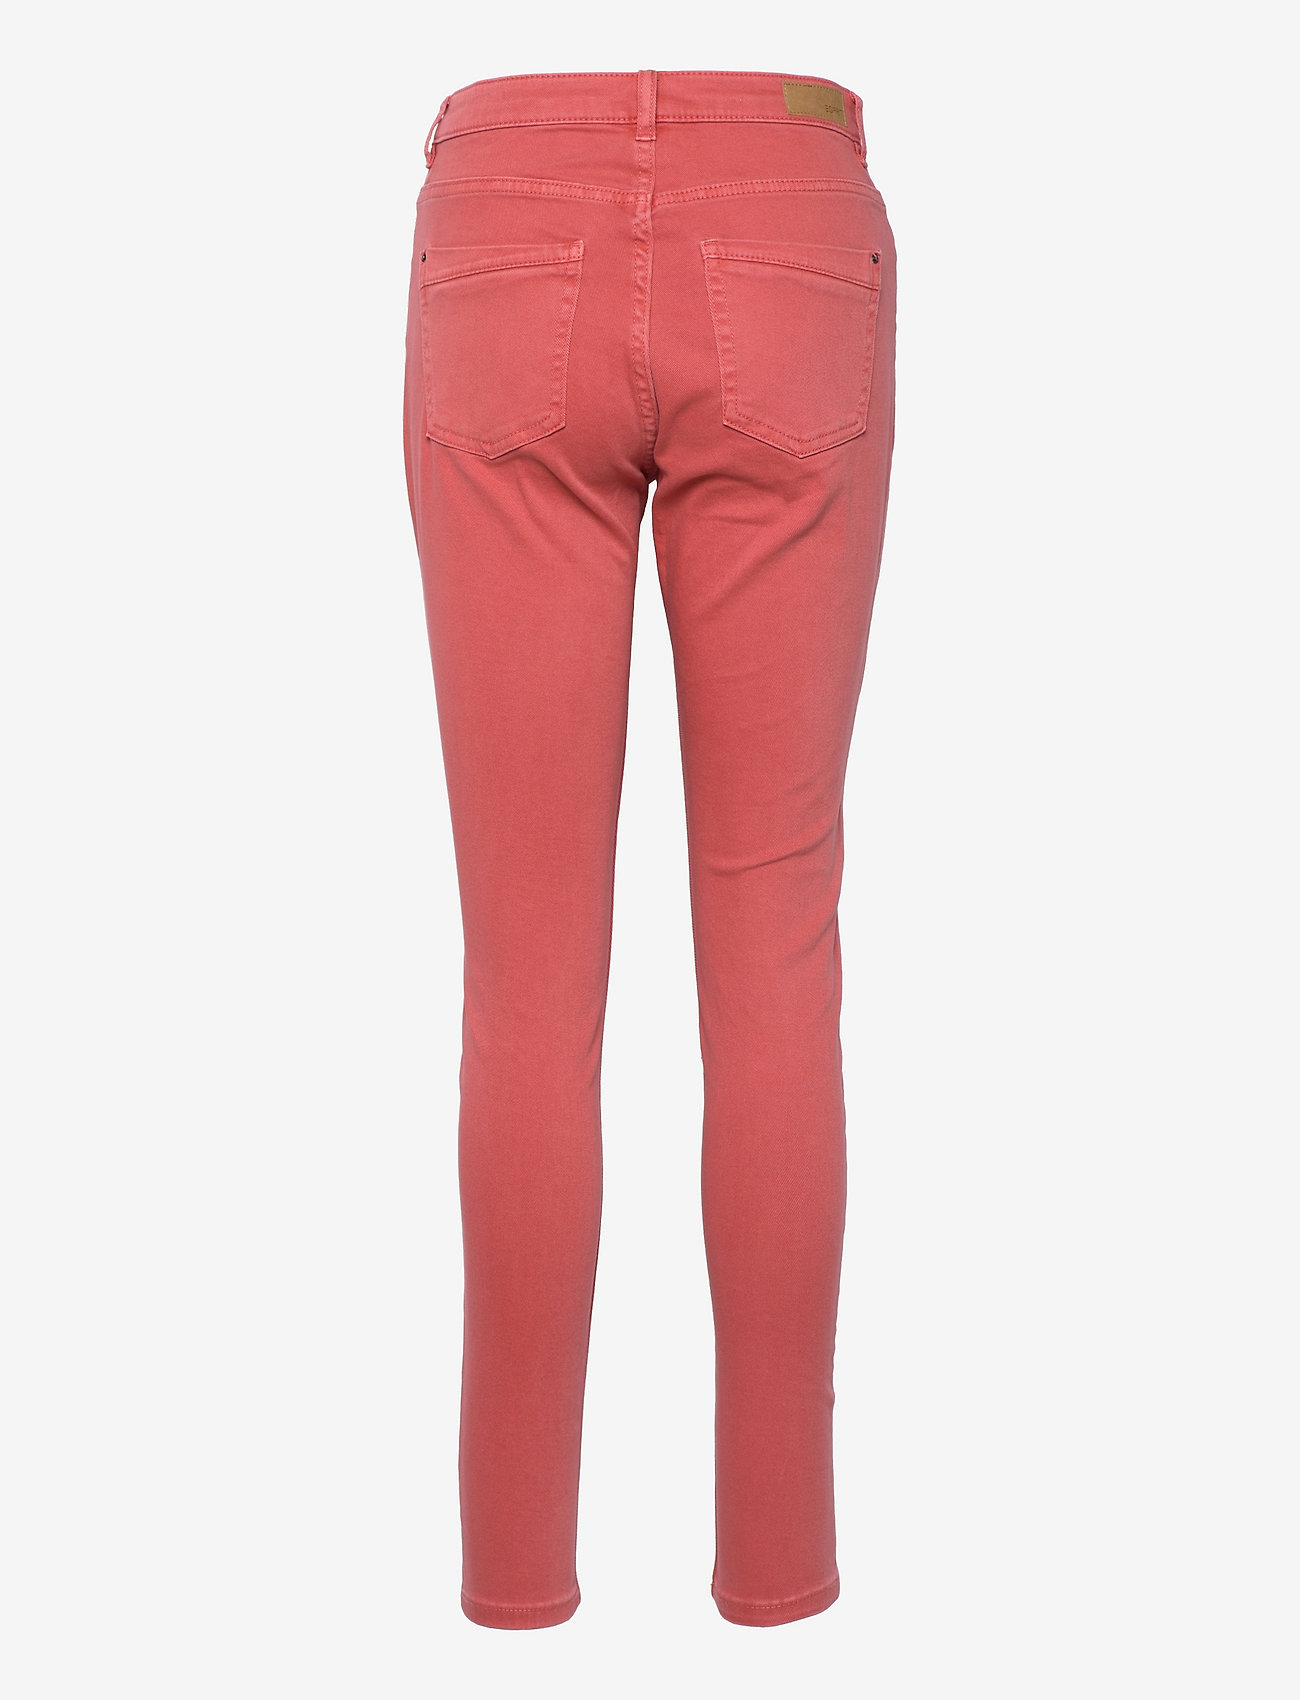 Esprit Casual - Stretch trousers with zip detail - slim jeans - coral - 1